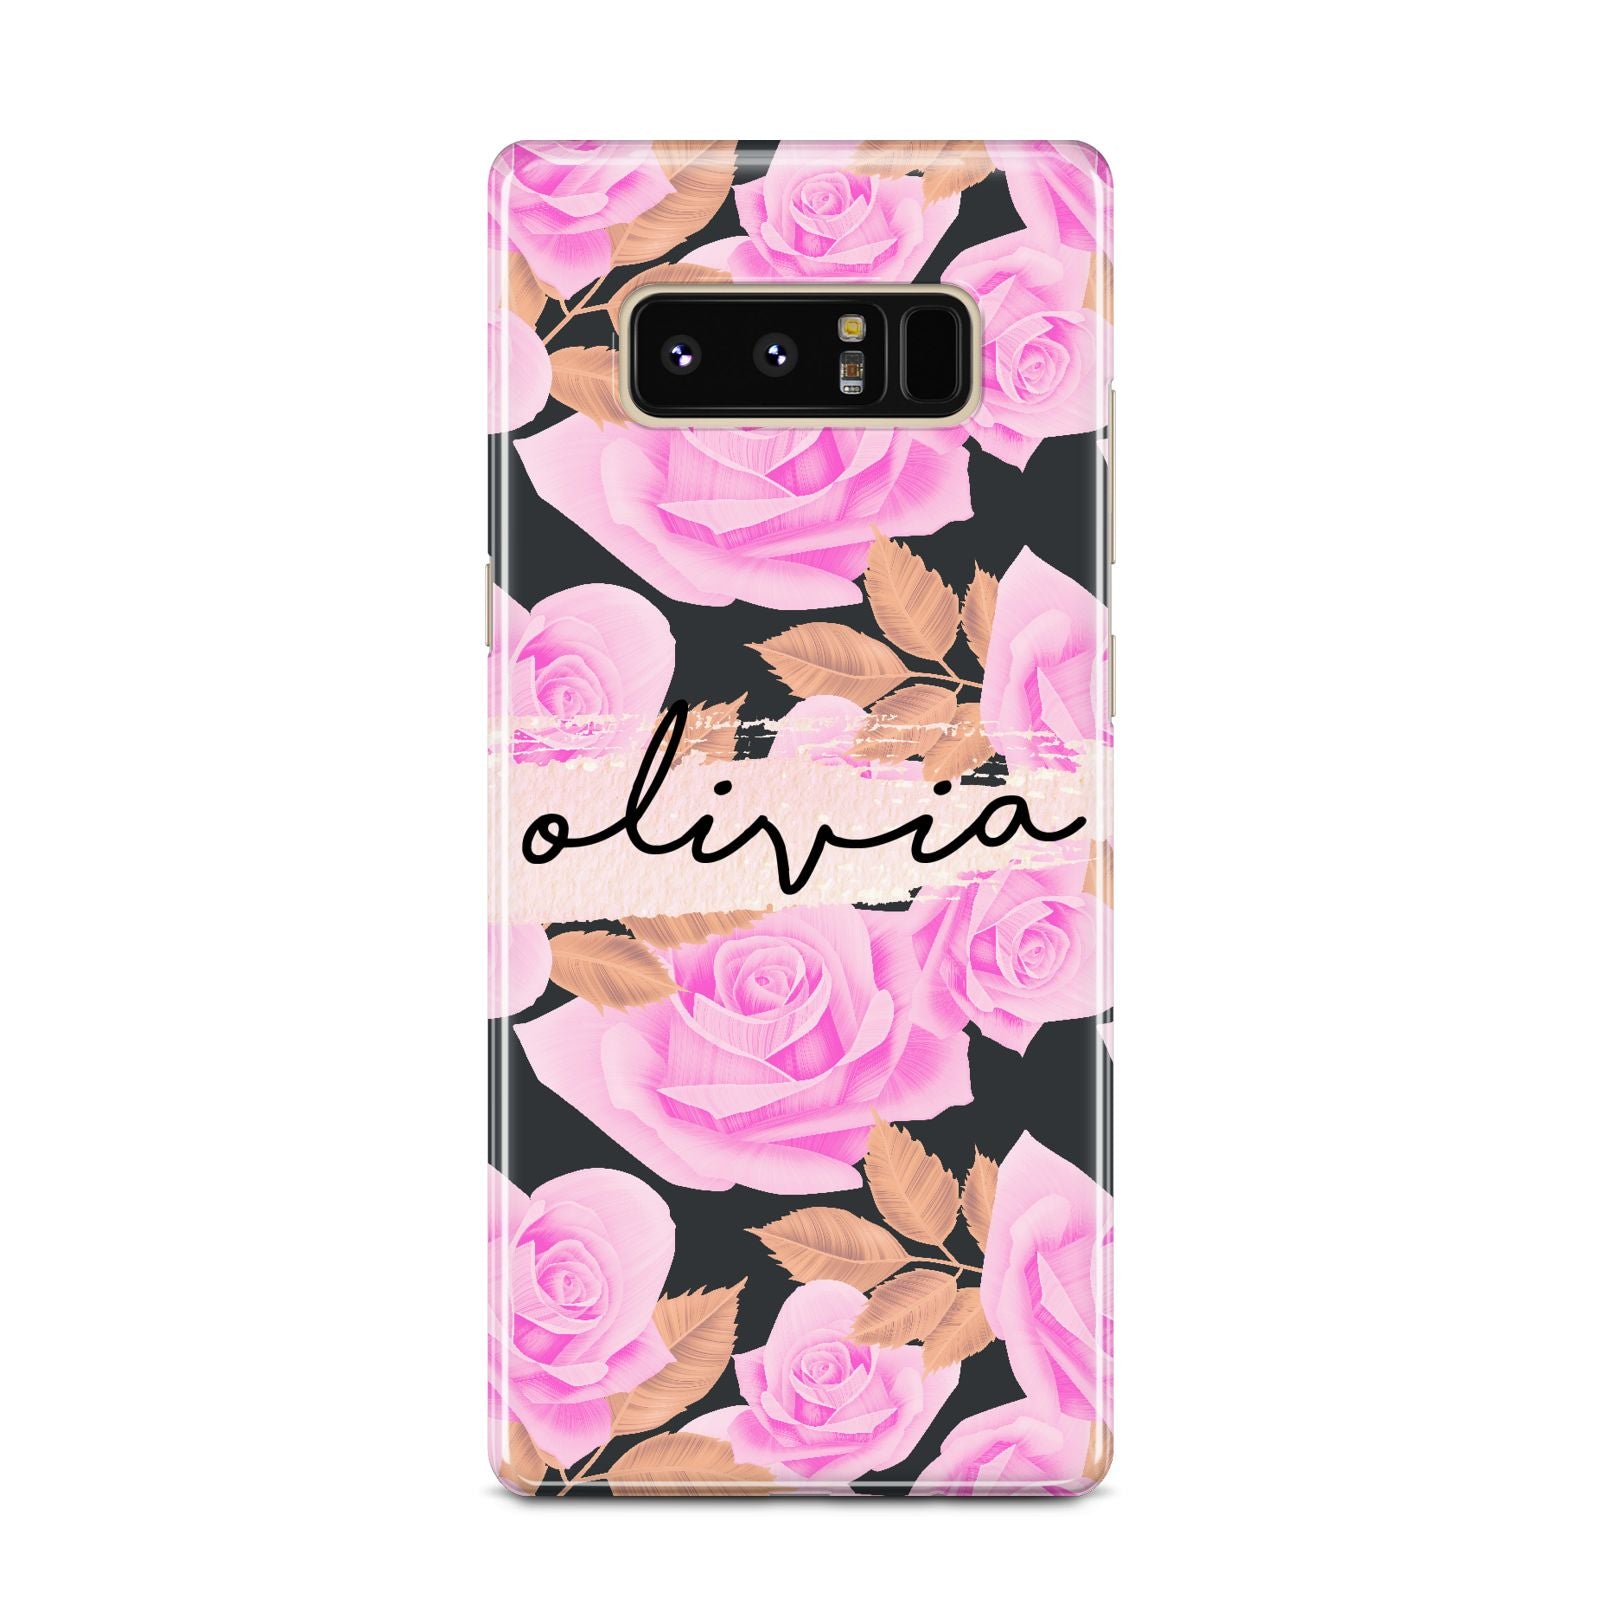 Personalised Floral Pink Roses Samsung Galaxy Note 8 Case